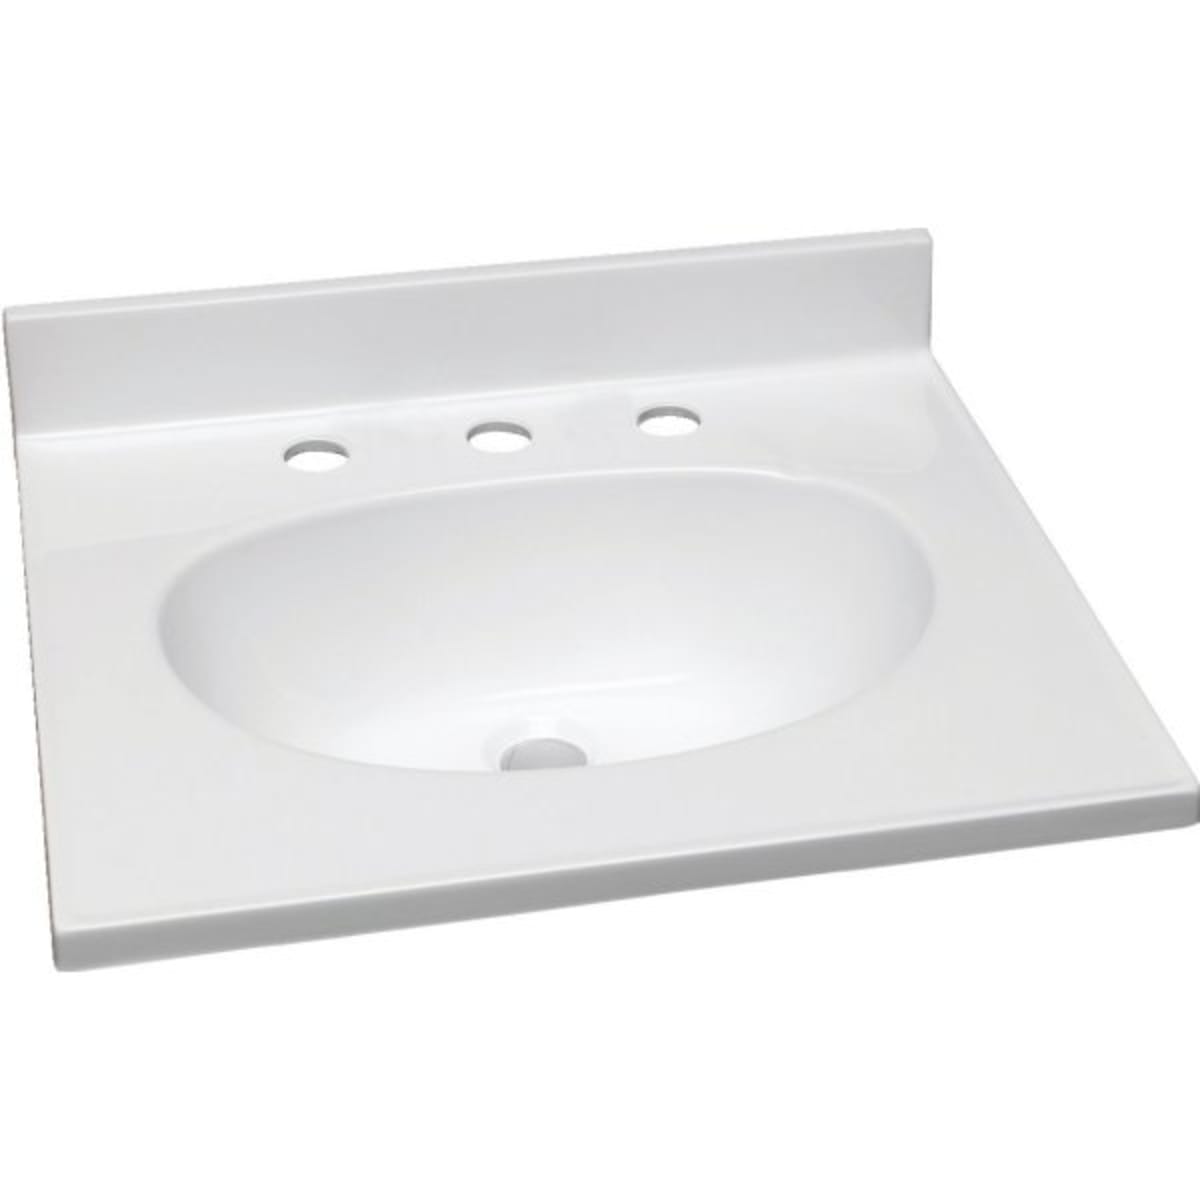 73 X 22 Solid White Cultured Marble Vanity Top And Double Bowl